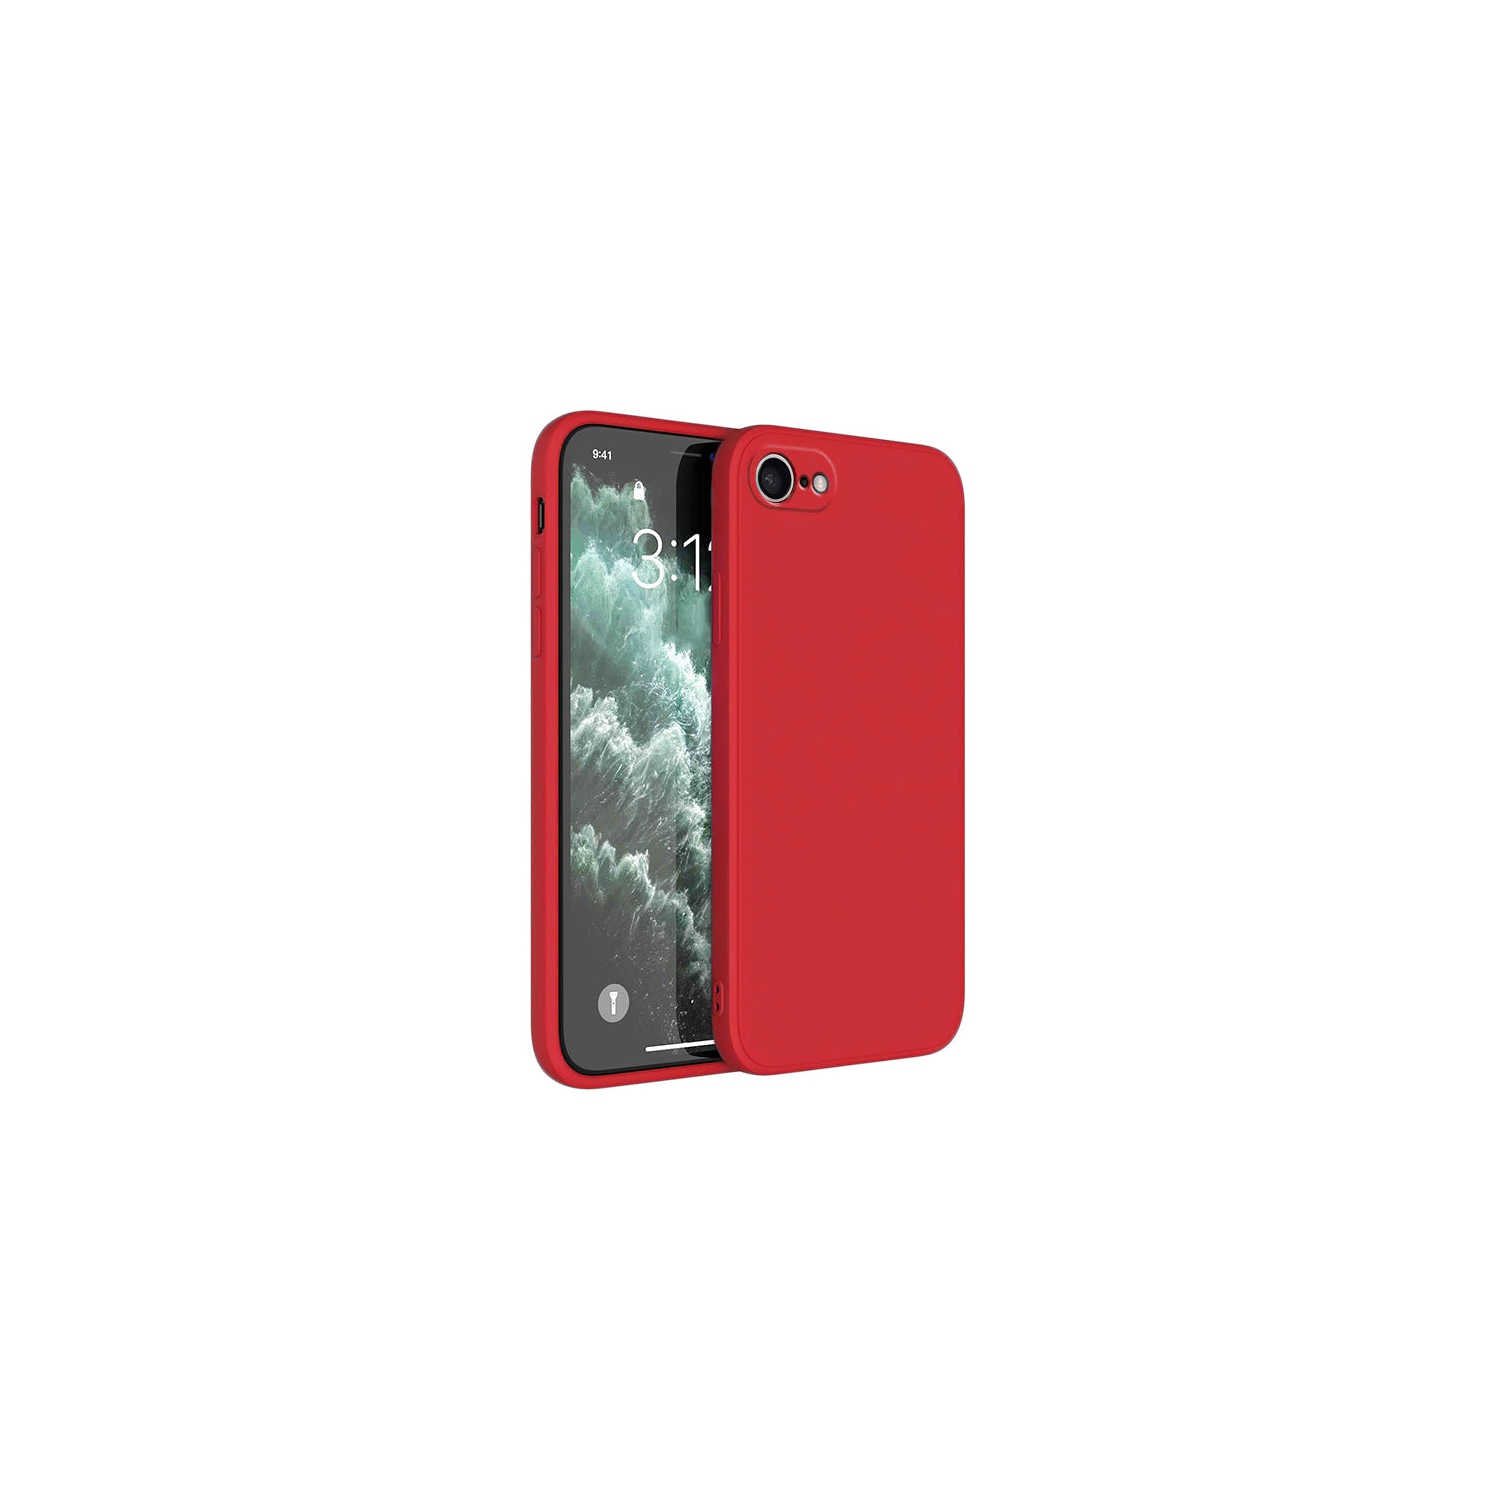 PANDACO Soft Shell Matte Red Case for iPhone 6 Plus or iPhone 6S Plus